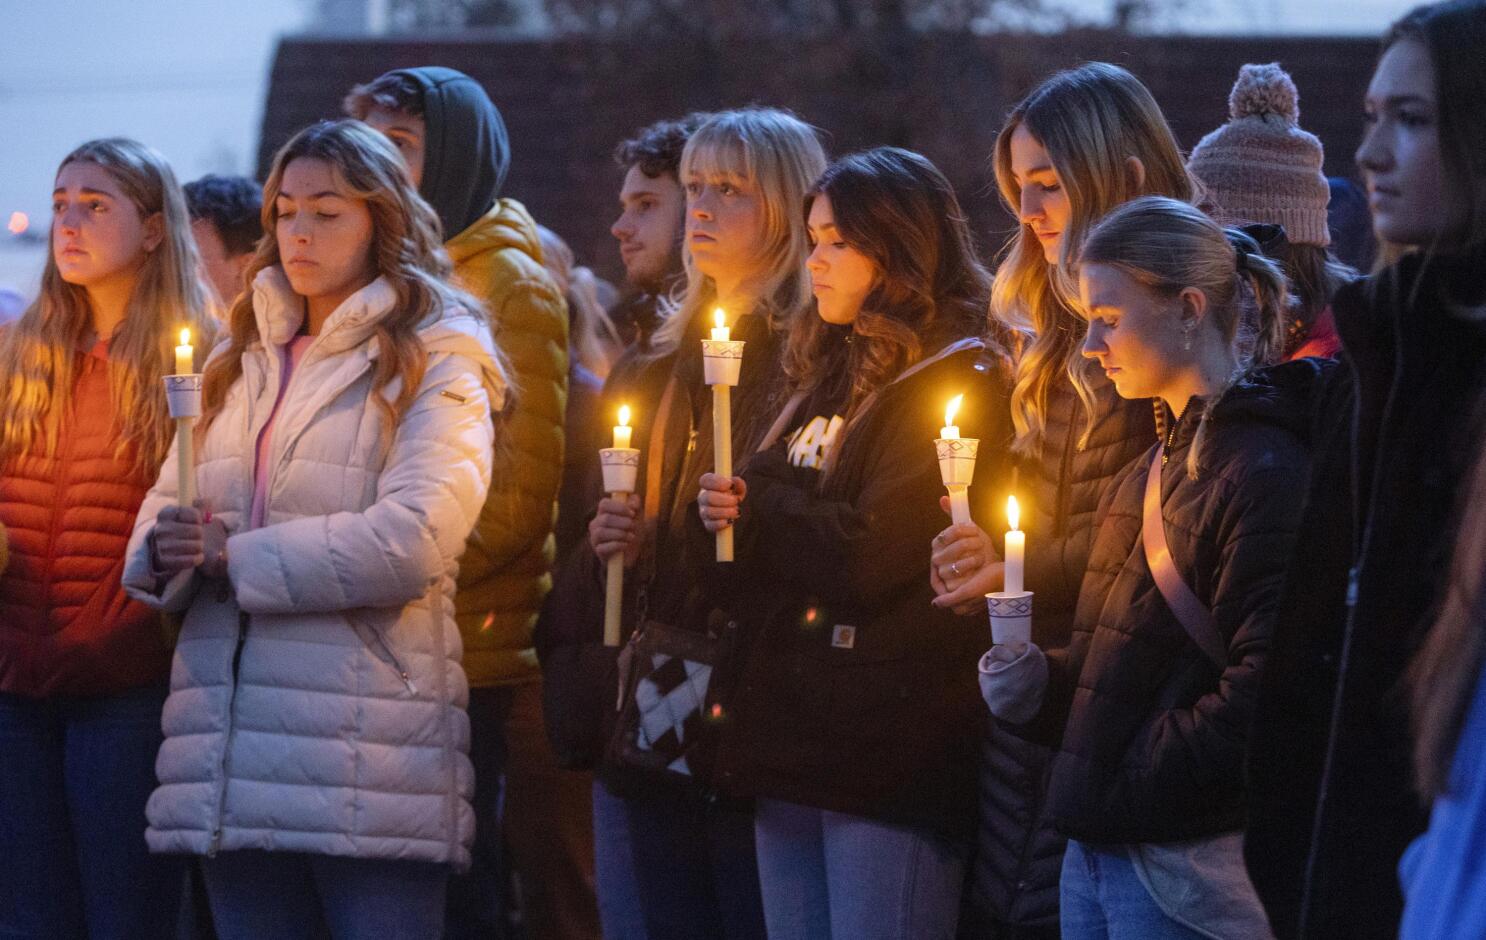 University of Idaho Students Were Stabbed to Death, Autopsy Confirms - WSJ